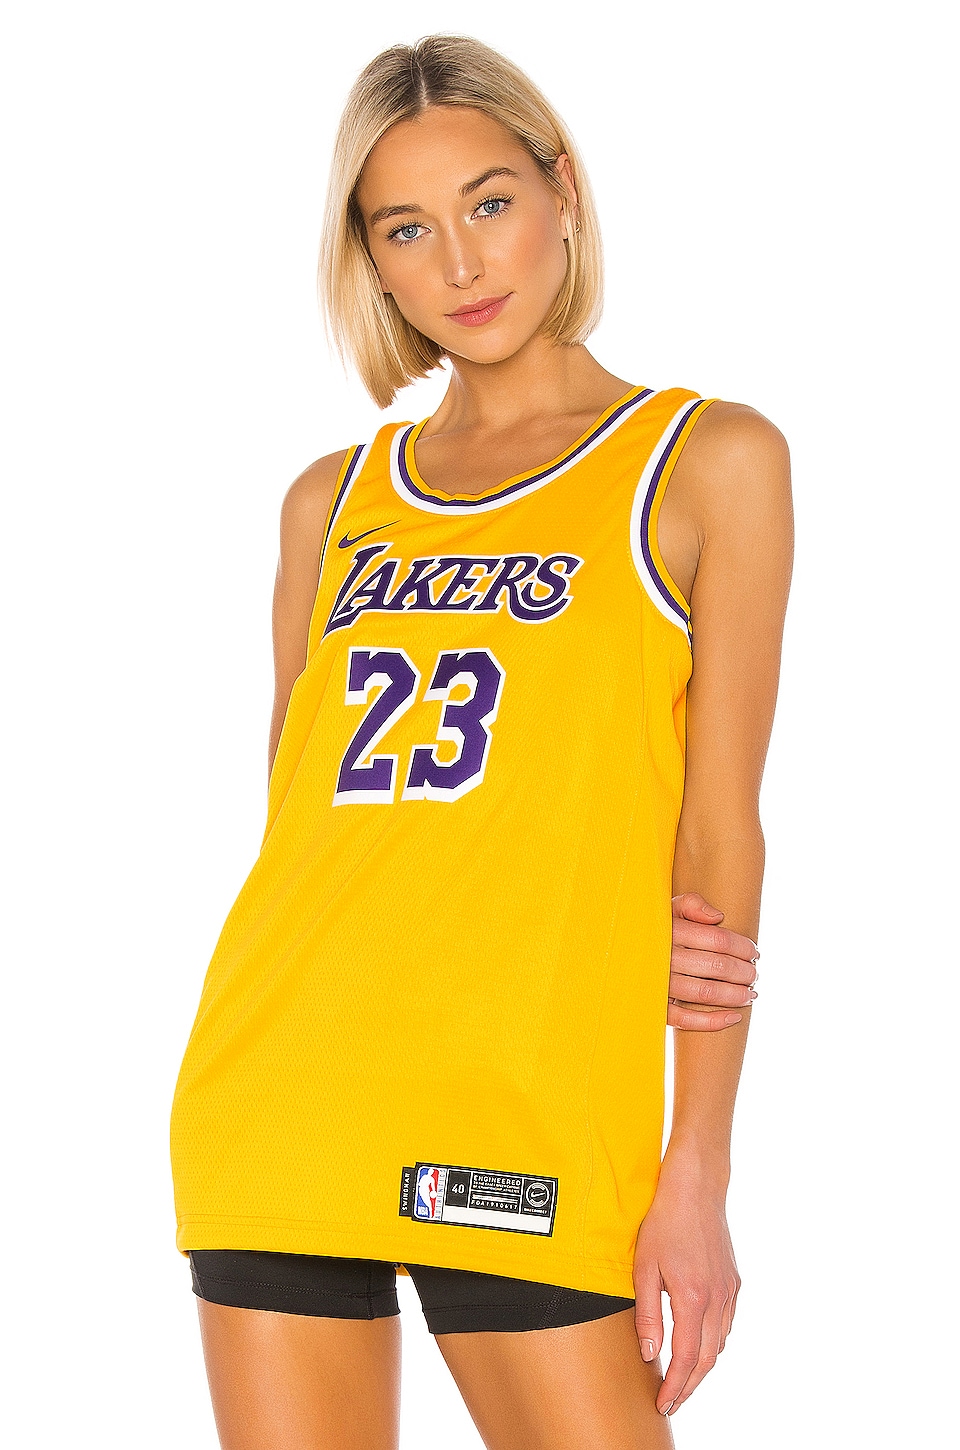 where to buy a lakers jersey